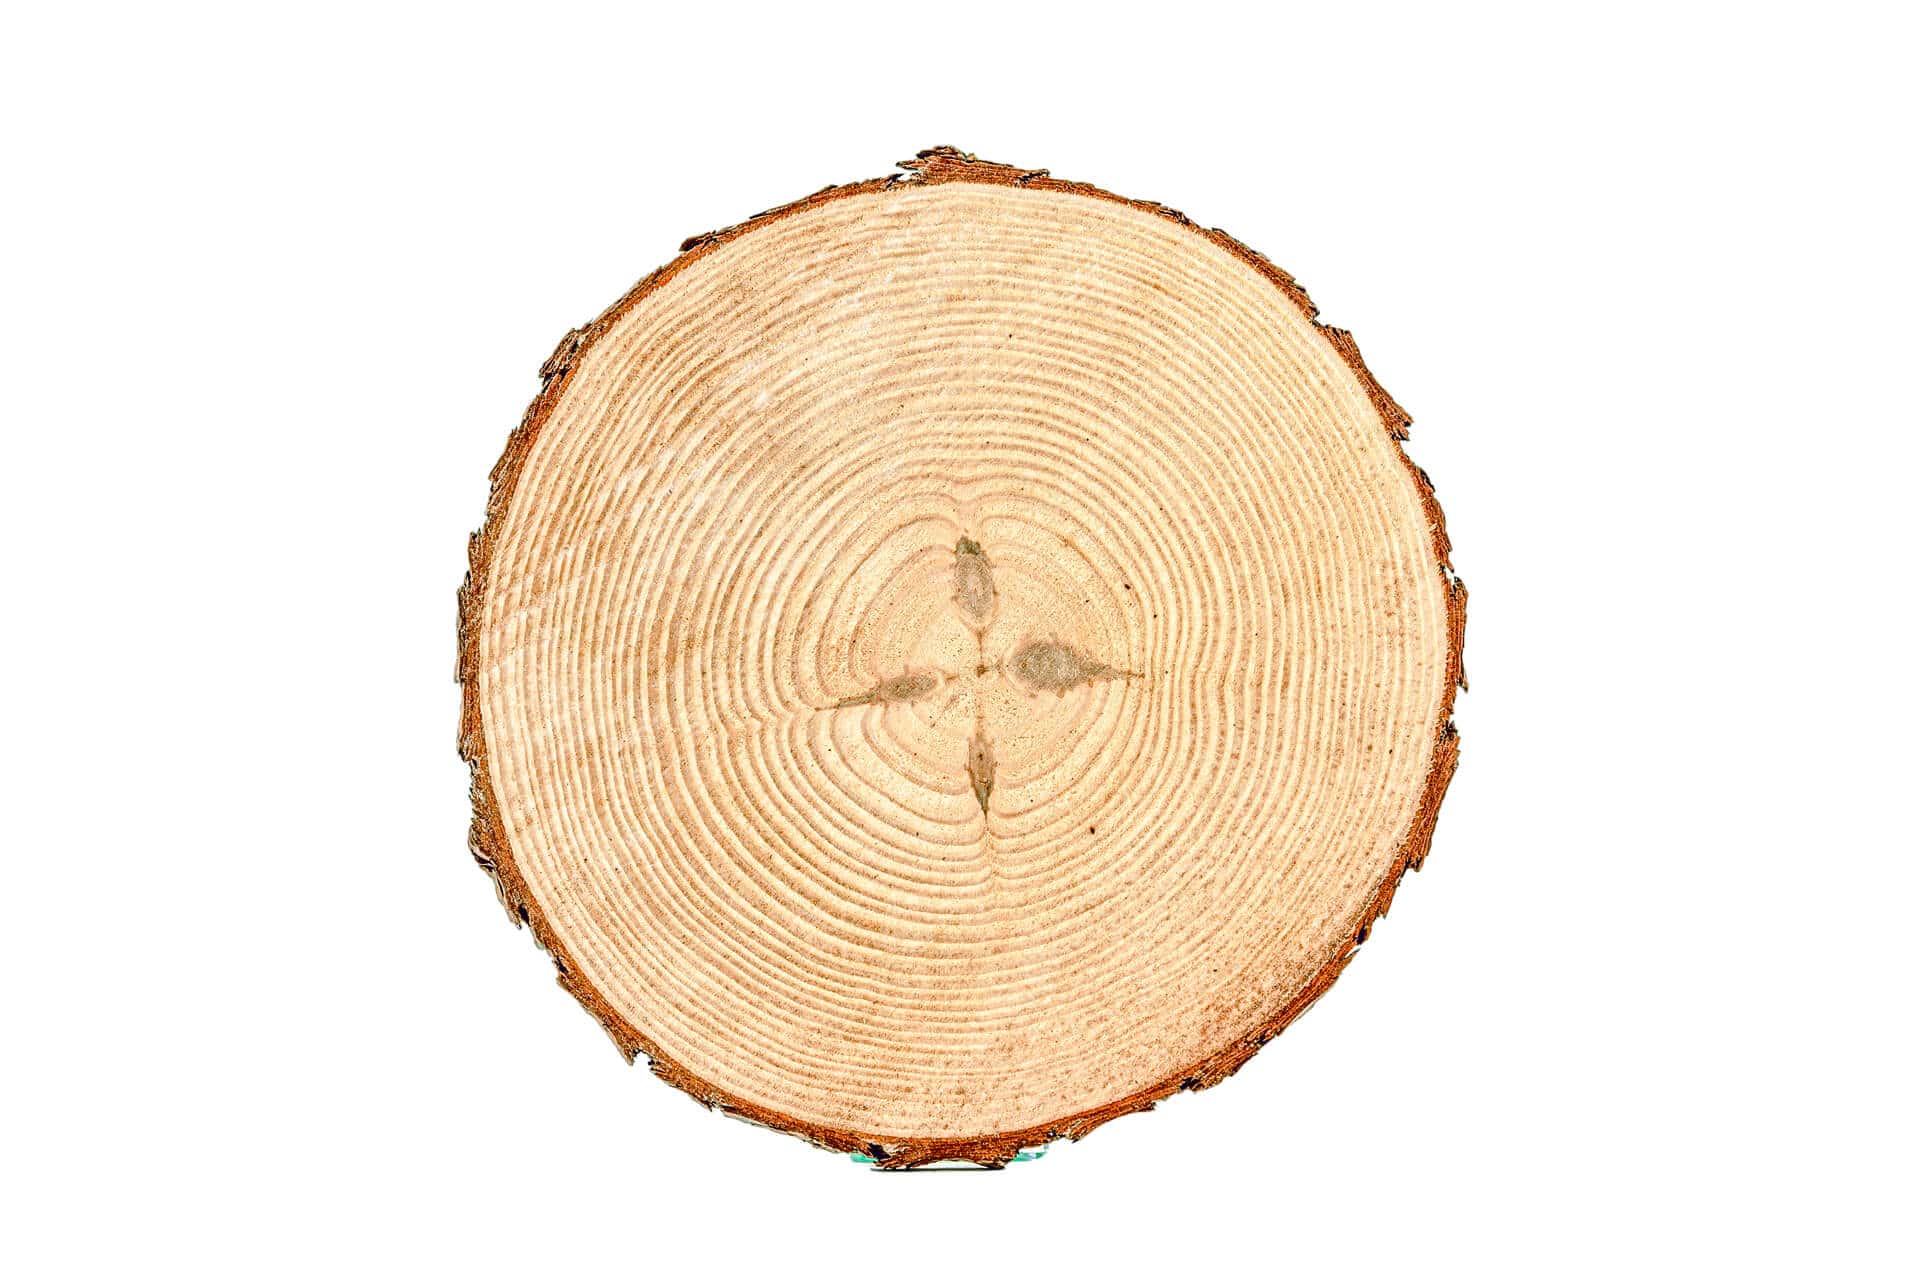 10 Inch 8 Inch Large Rowan Wood Slice Wooden Slices Rustic Wood Slices for  DIY Rowan Wood Large Wood Slices 10 Inch Slices -  Canada